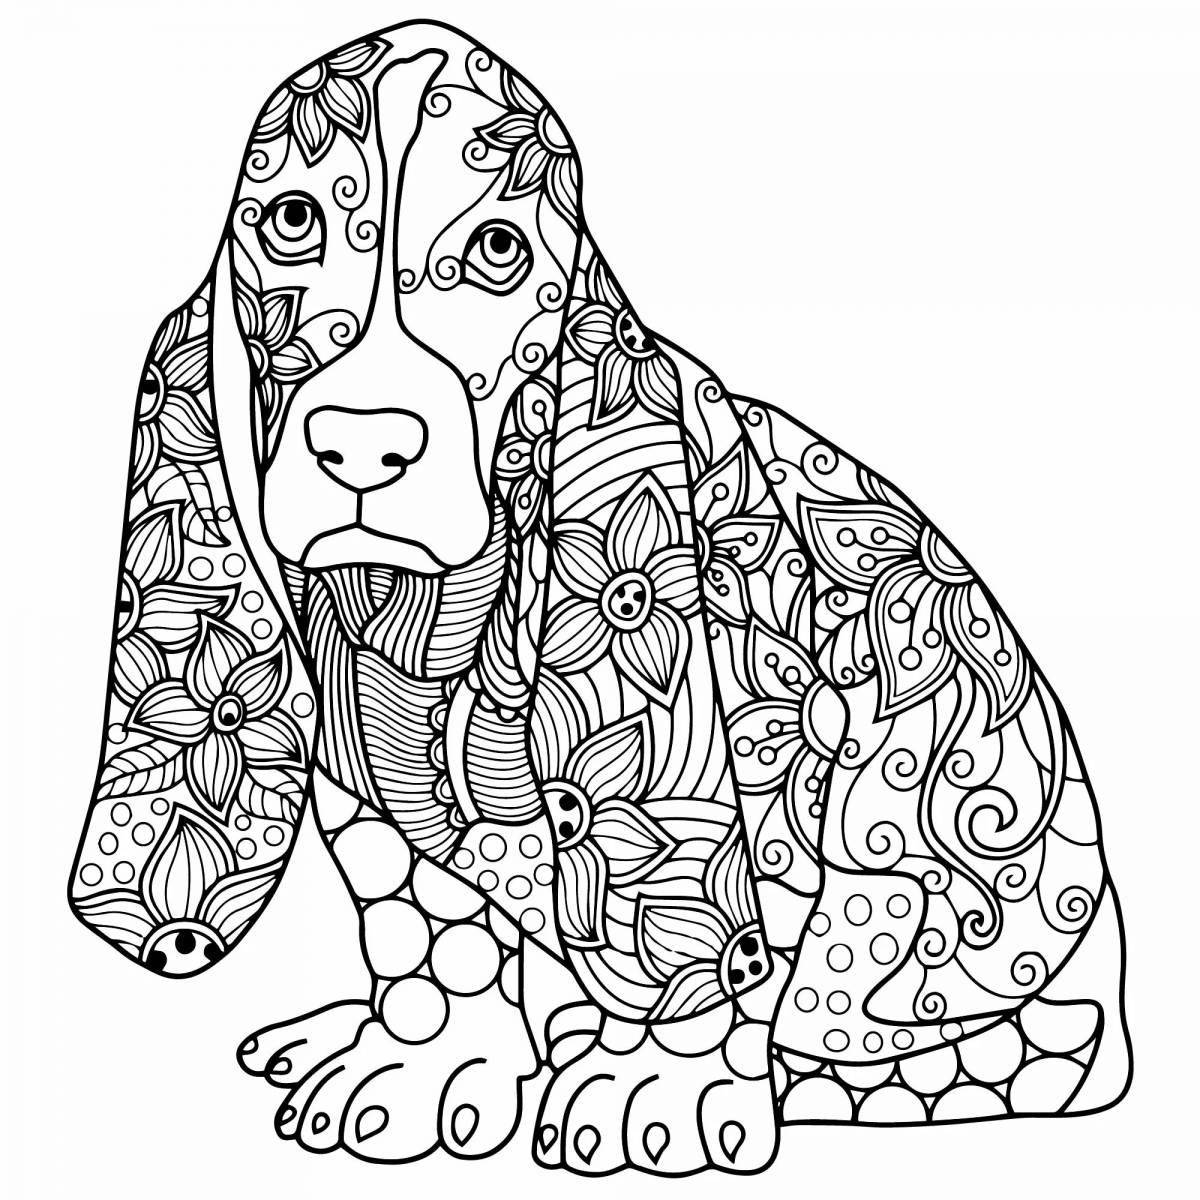 Adorable anti-stress animal coloring book for kids